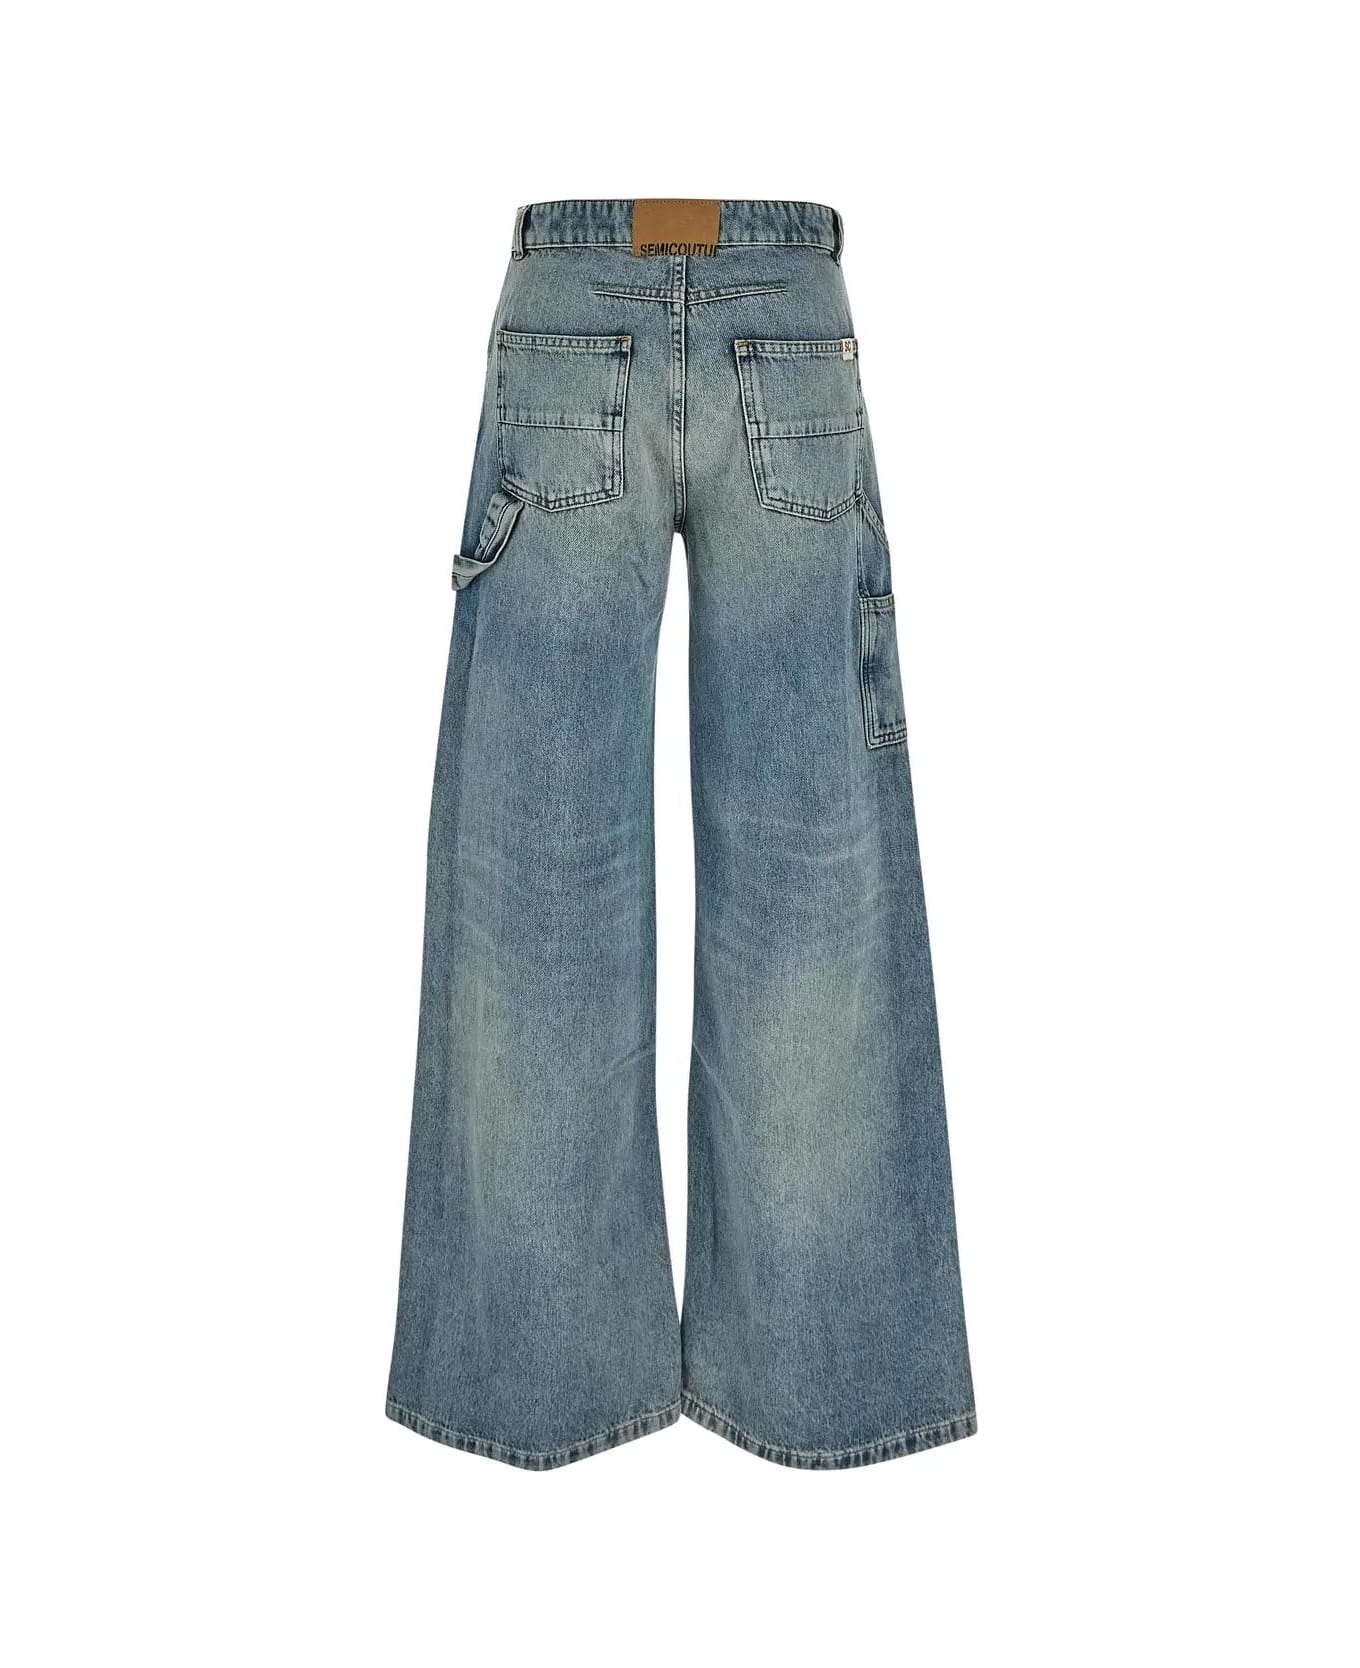 SEMICOUTURE Cargo Jeans - Blue